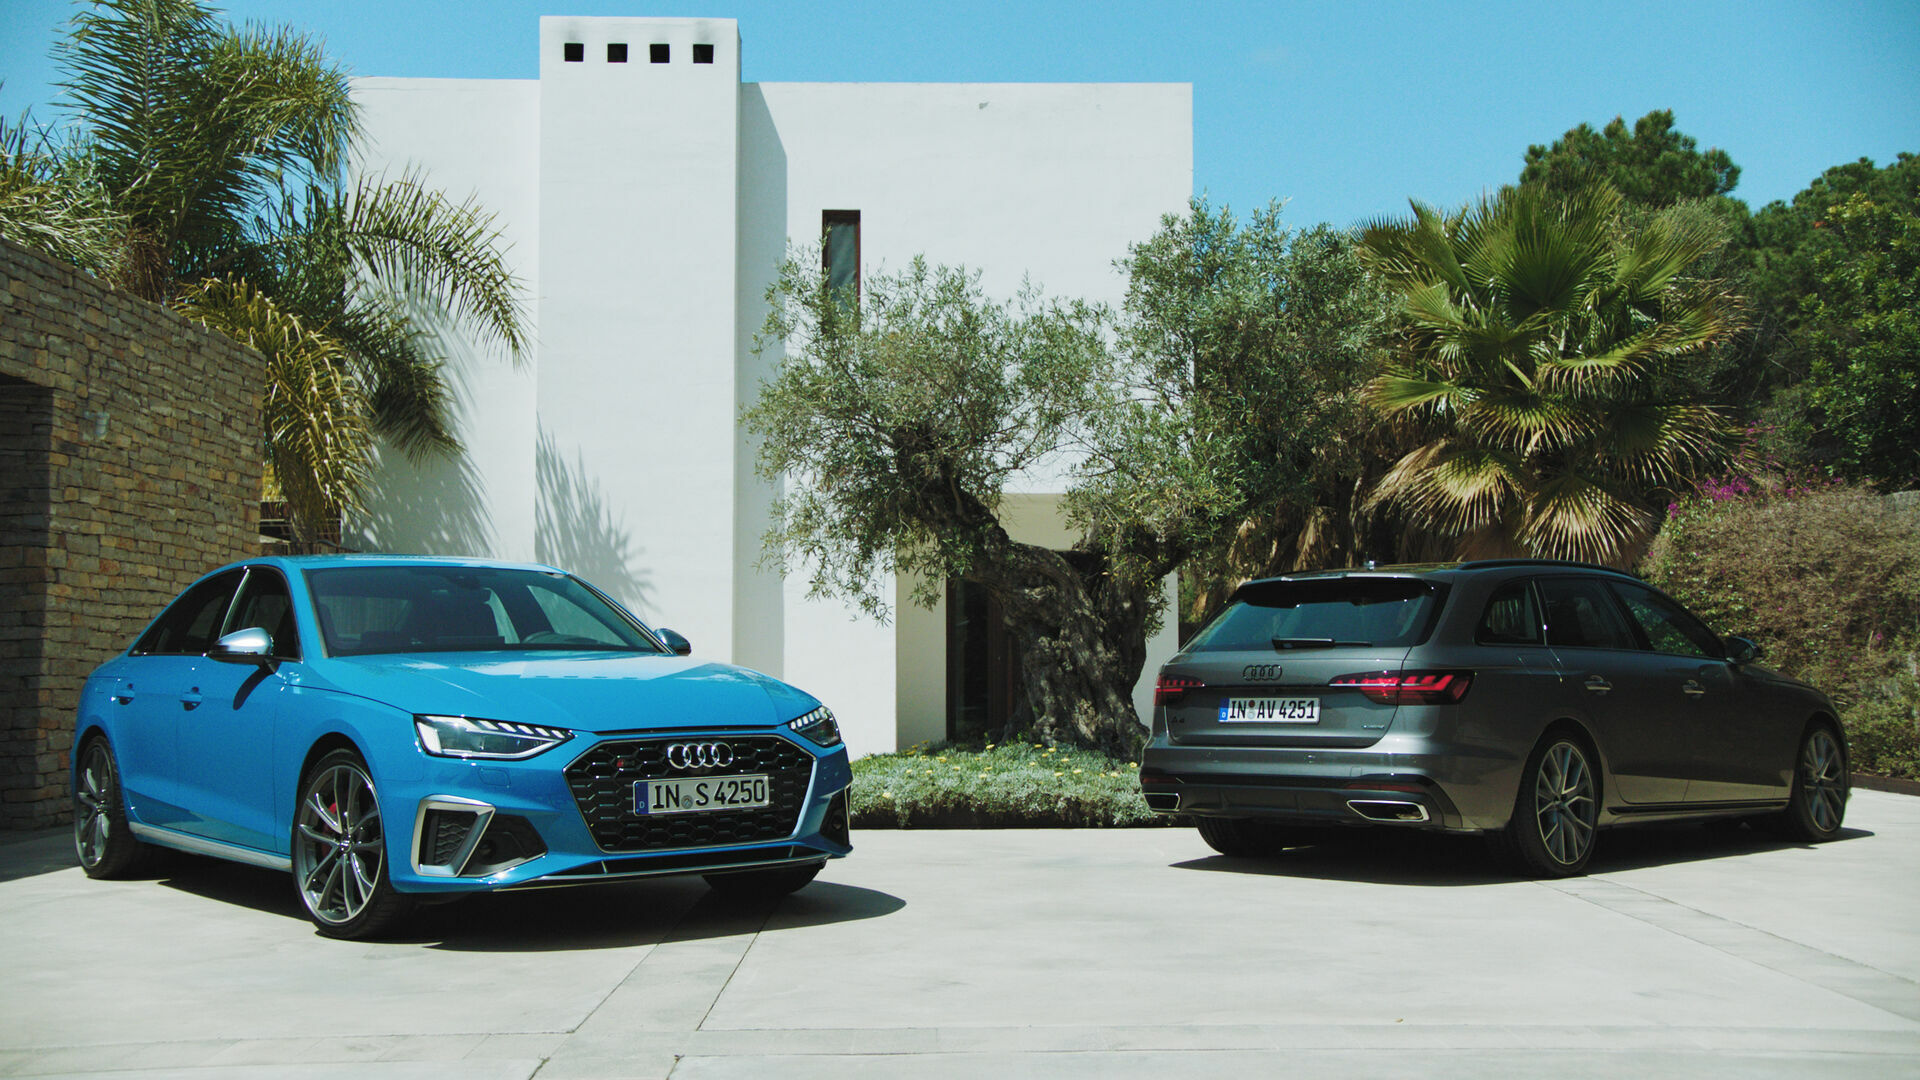 The new Audi A4 (Trailer)